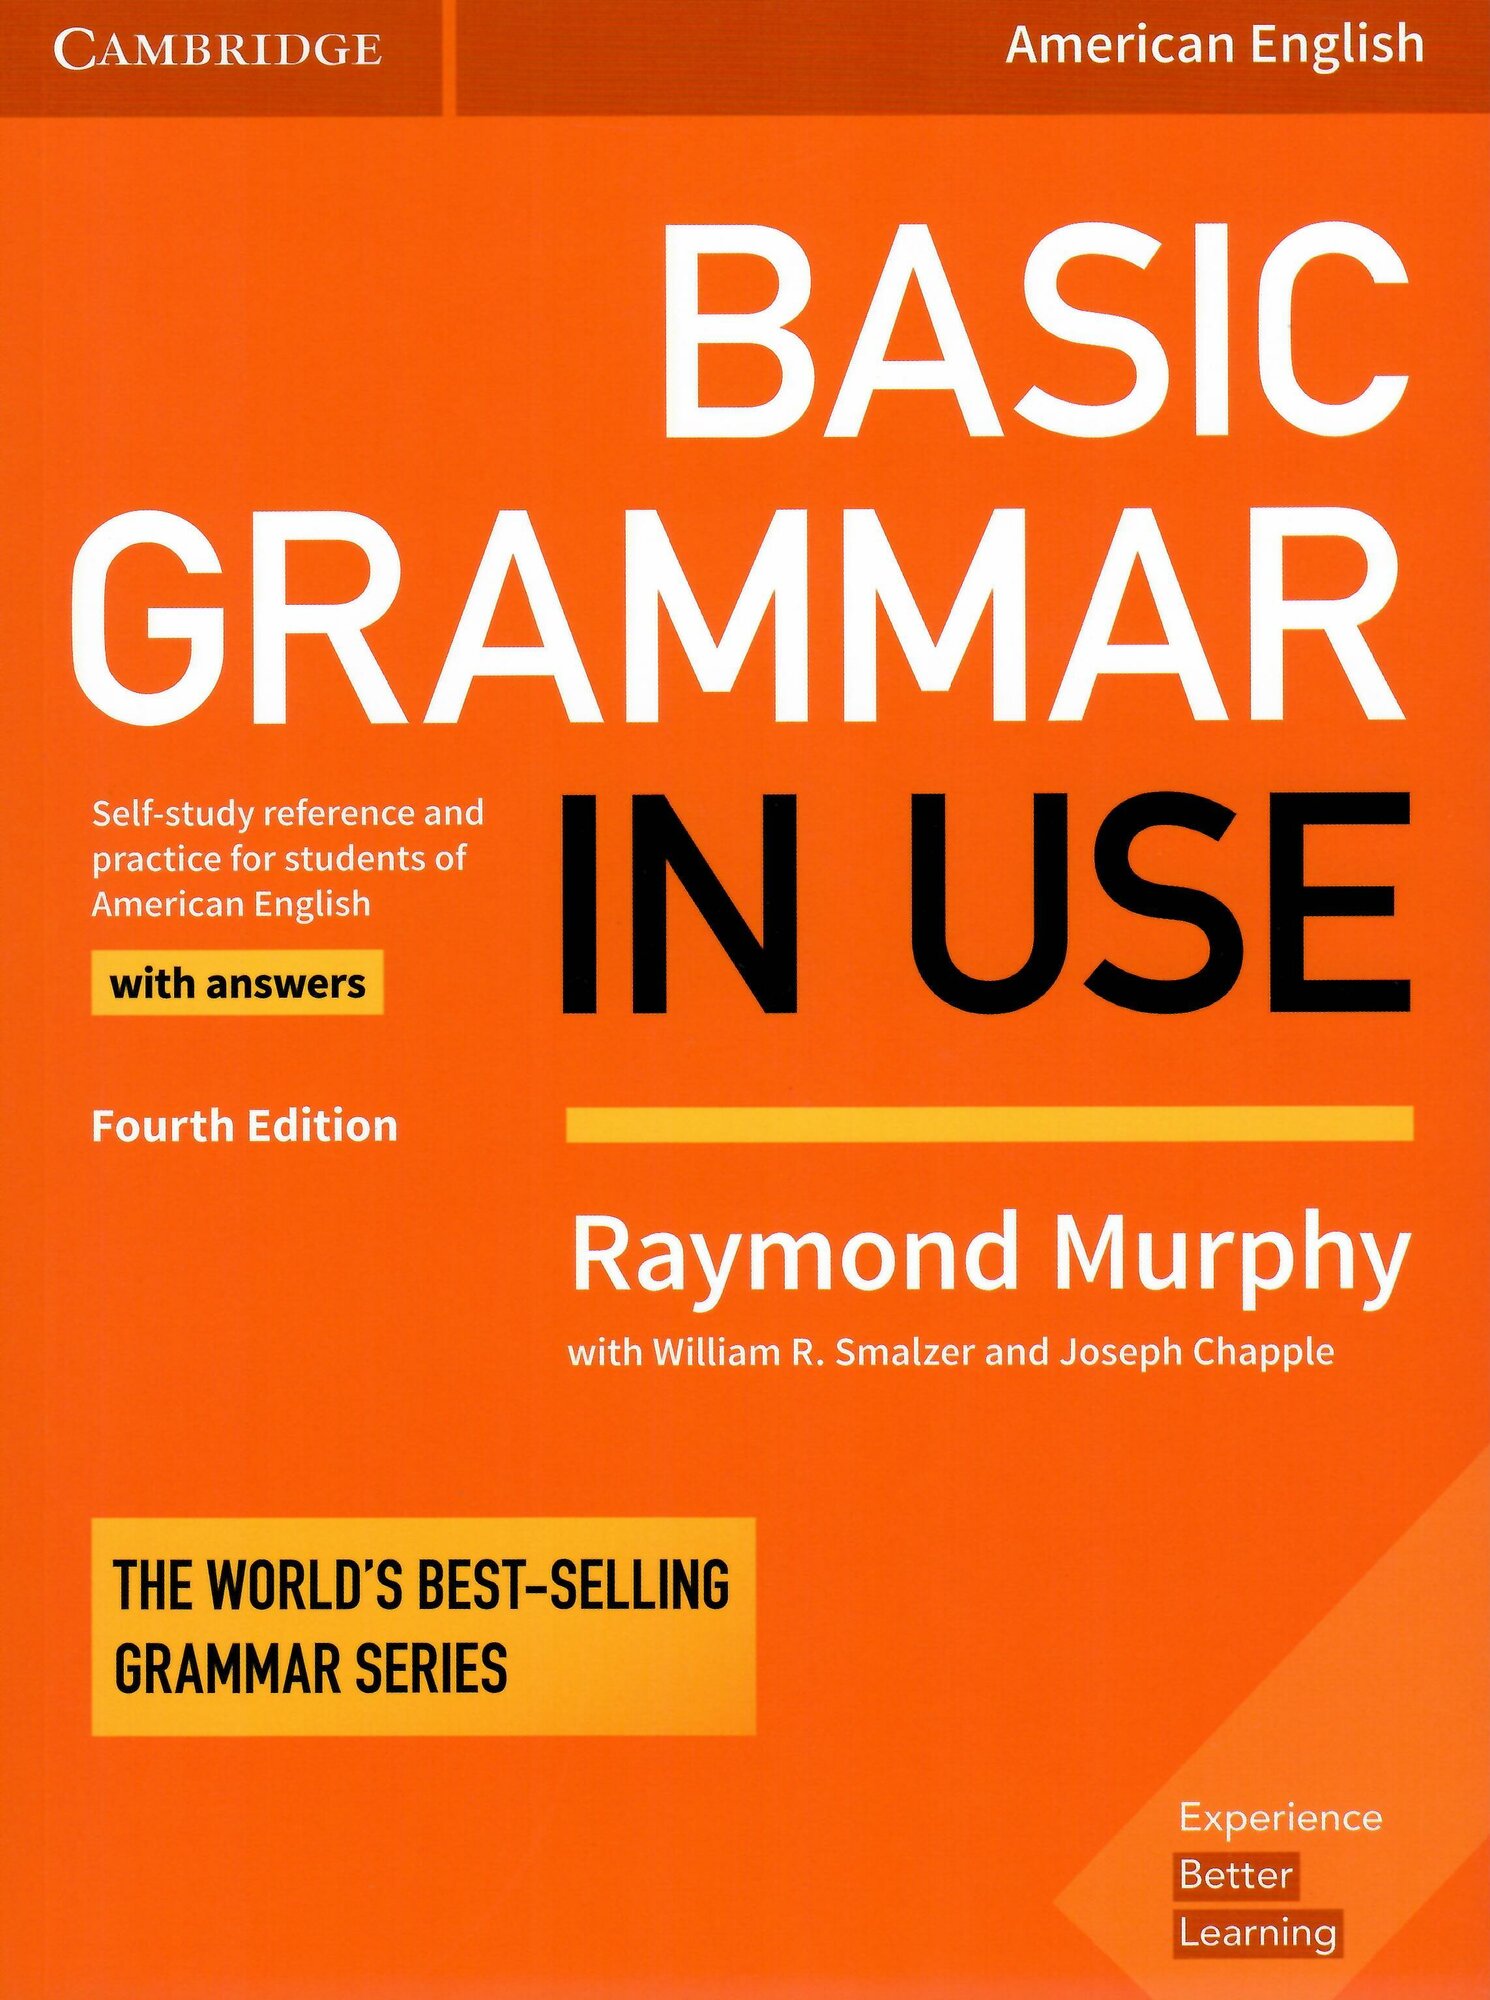 Basic Grammar in Use (American) Fourth Edition with Answers